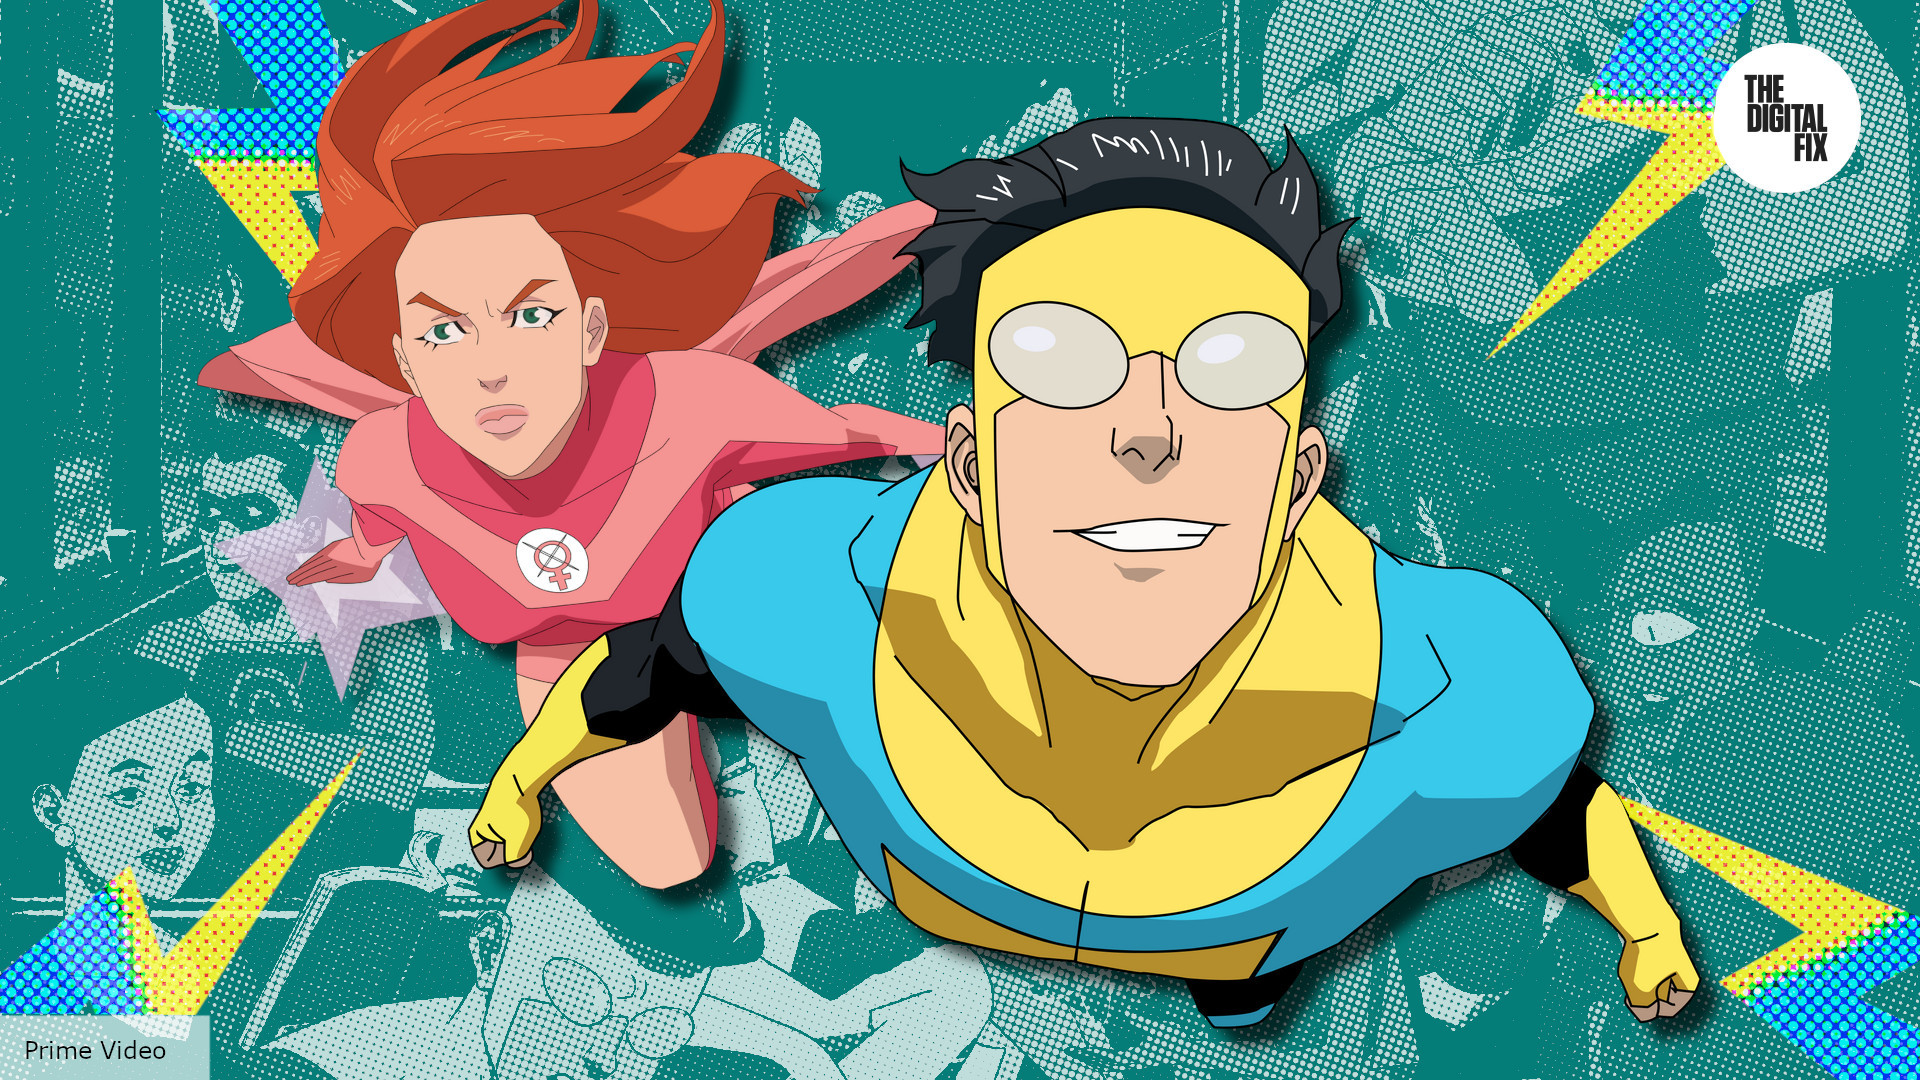 invincible season 2: What is the release date of Invincible Season